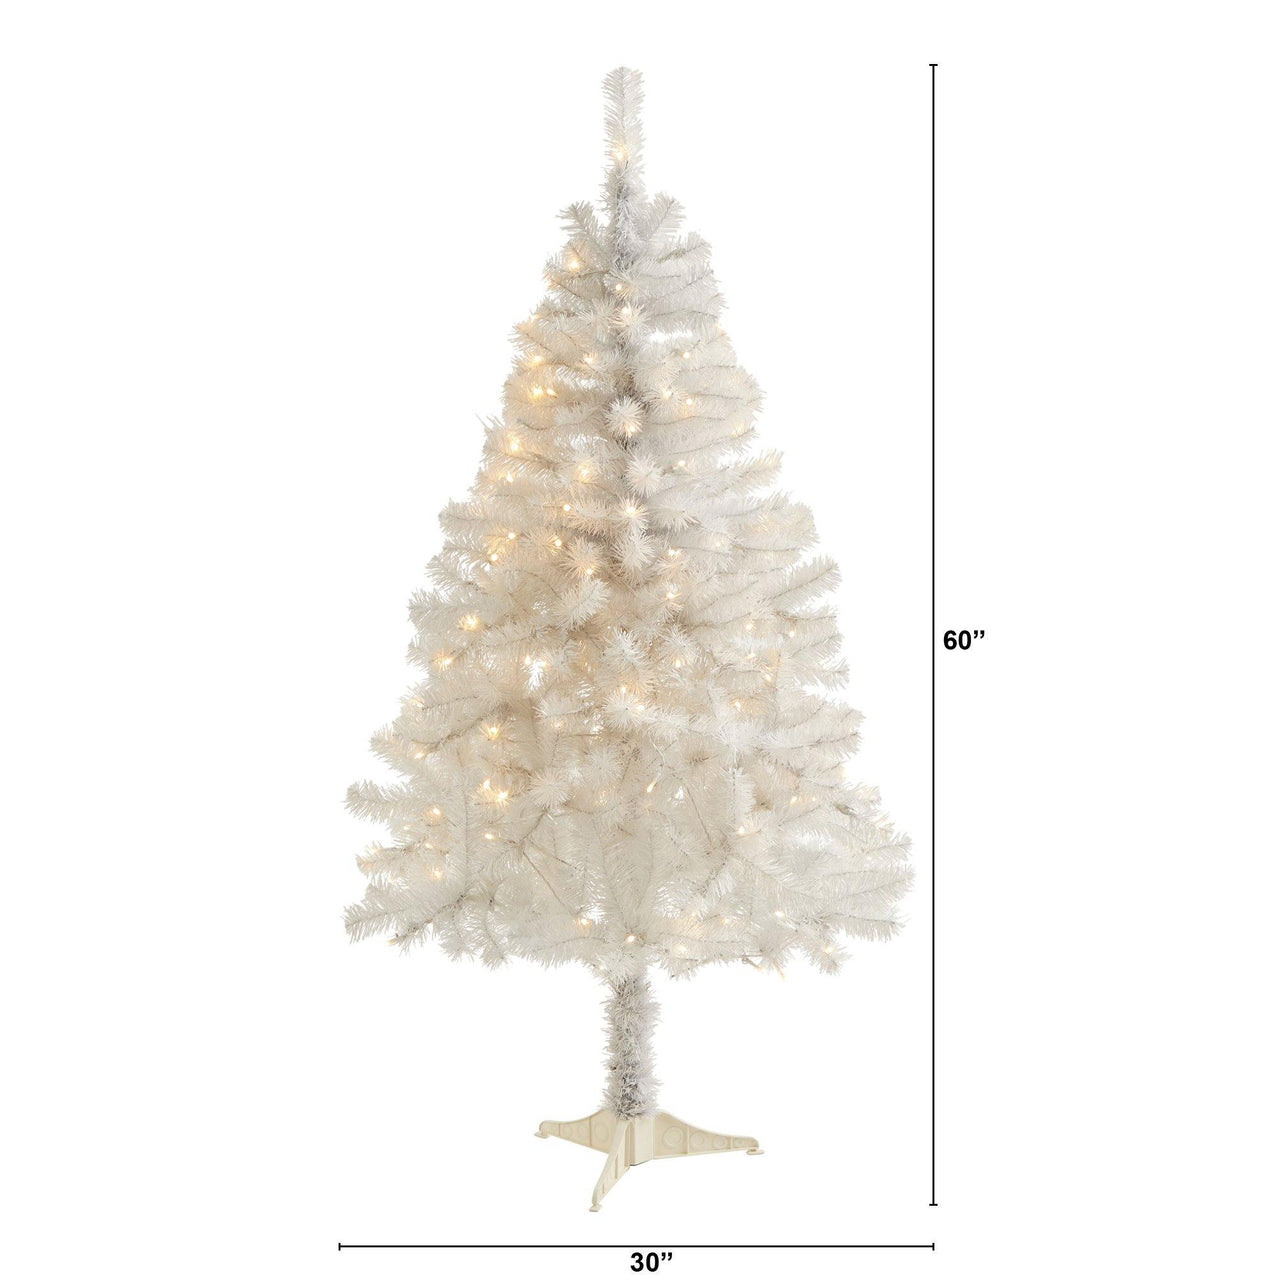 5' White Artificial Christmas Tree with 350 Bendable Branches and 150 Clear LED Lights - The Fox Decor